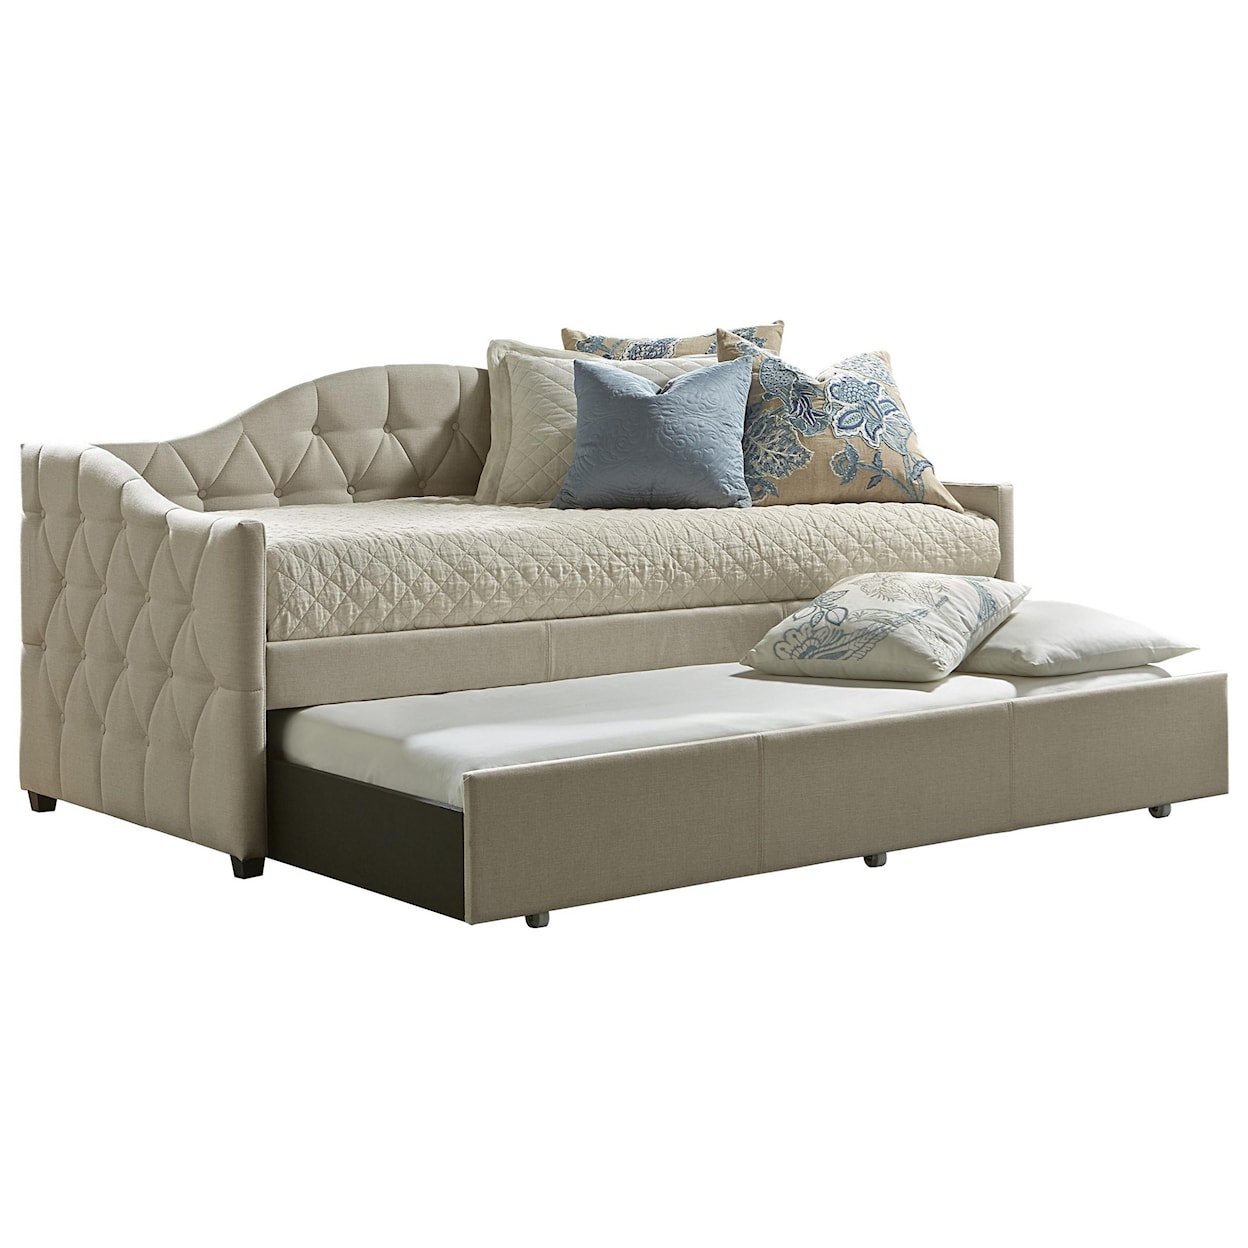 Hillsdale    Daybed with Trundle